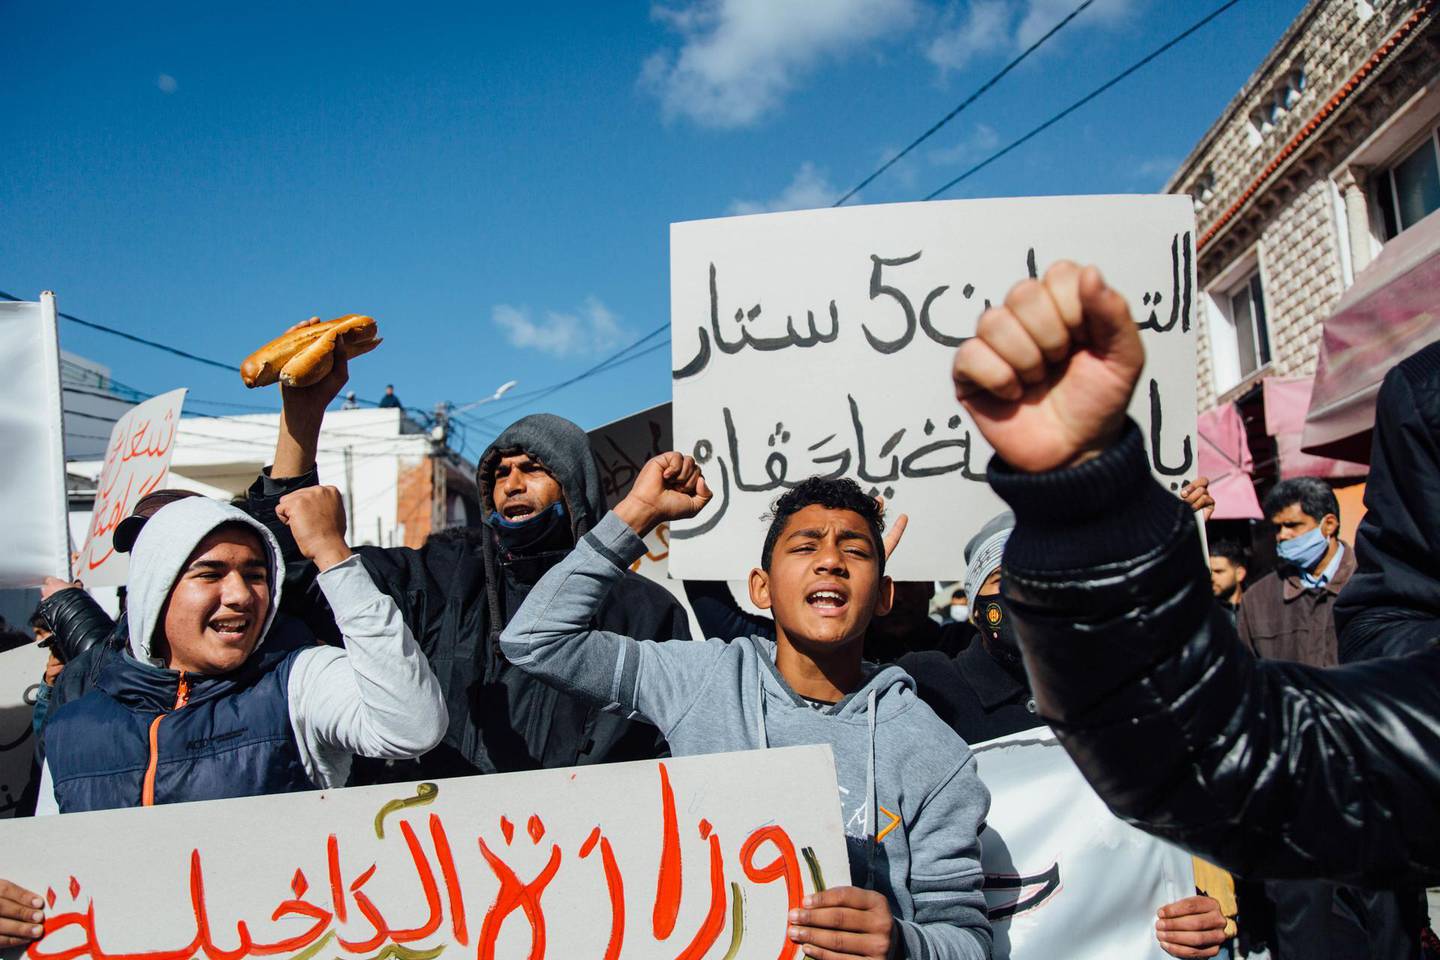 Protests in Ettadhaman, a working-class neighborhood in Tunis, in January, 2021. Several protesters brought loaves of bread as a symbol of the poverty and hunger they face. Erin Clare Brown for The National